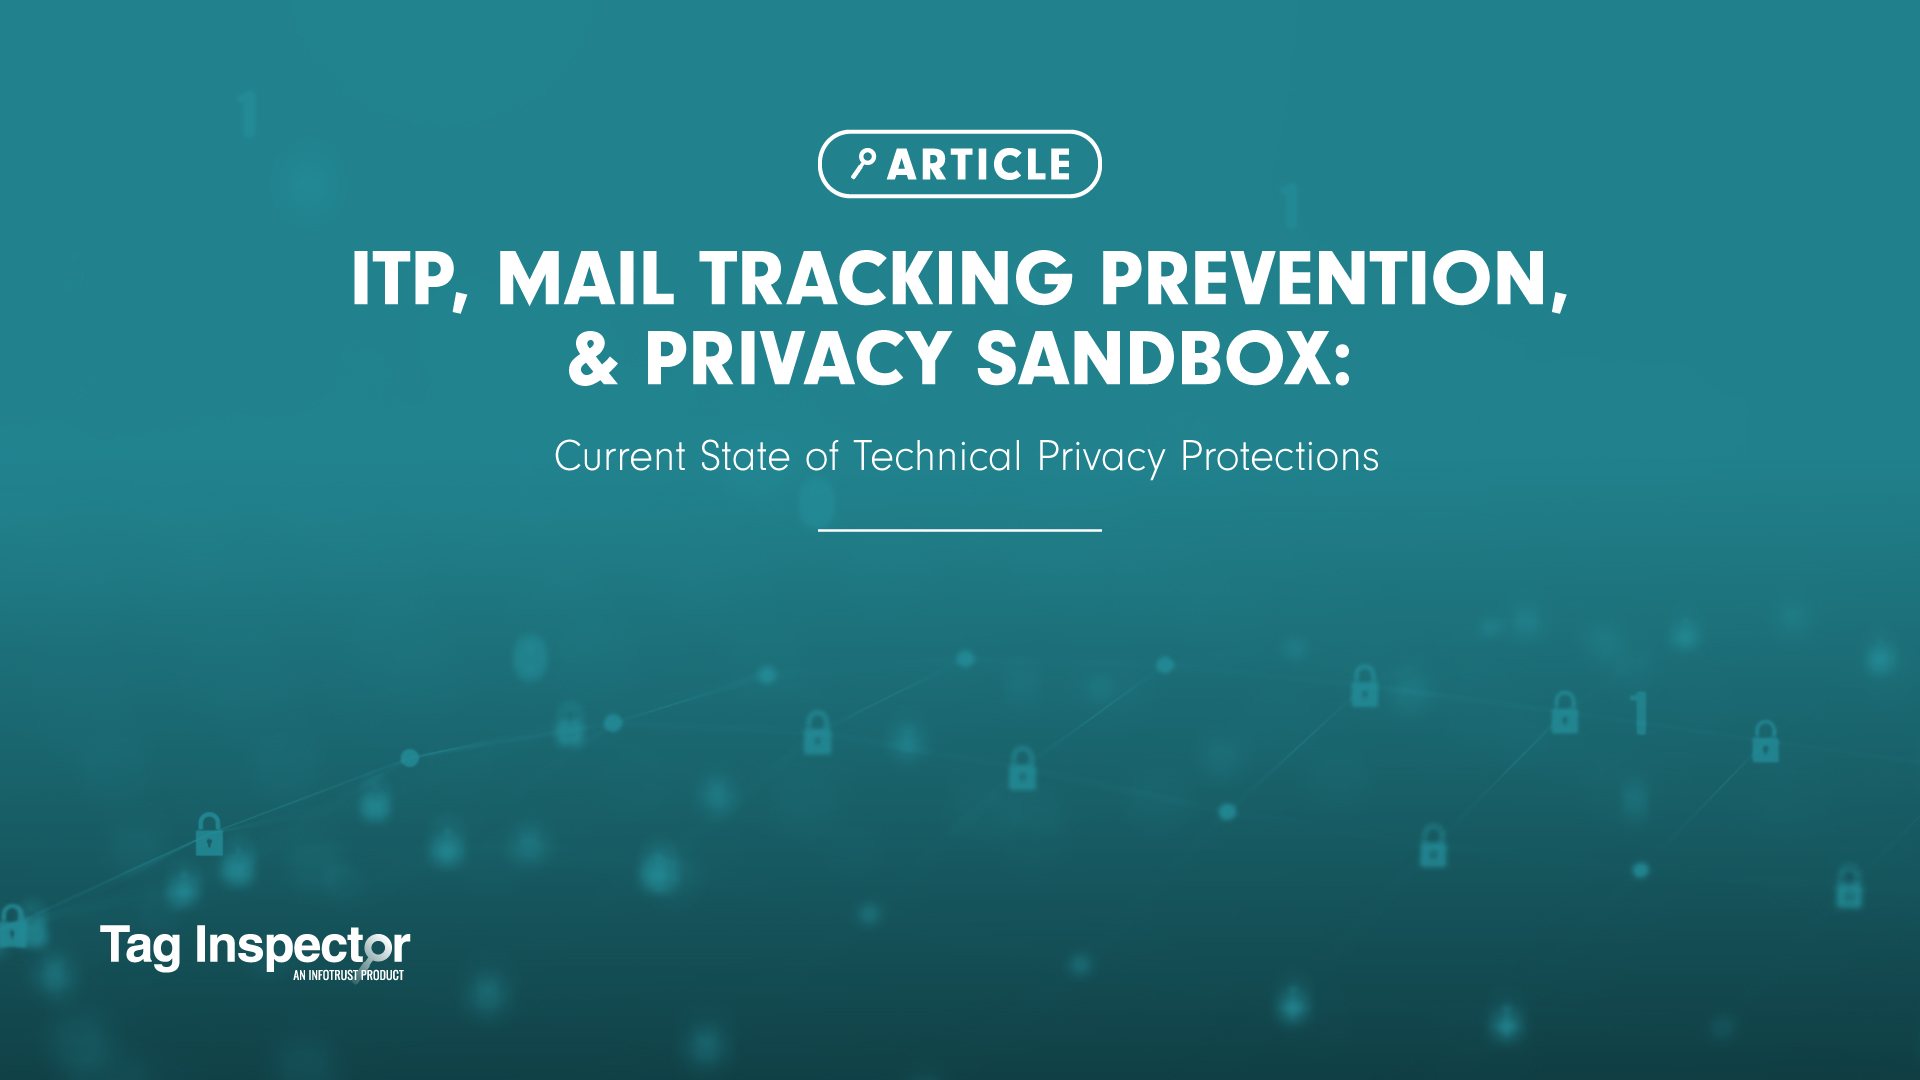 ITP, Mail Tracking Prevention, Privacy Sandbox: Current State of Technical Privacy Protections